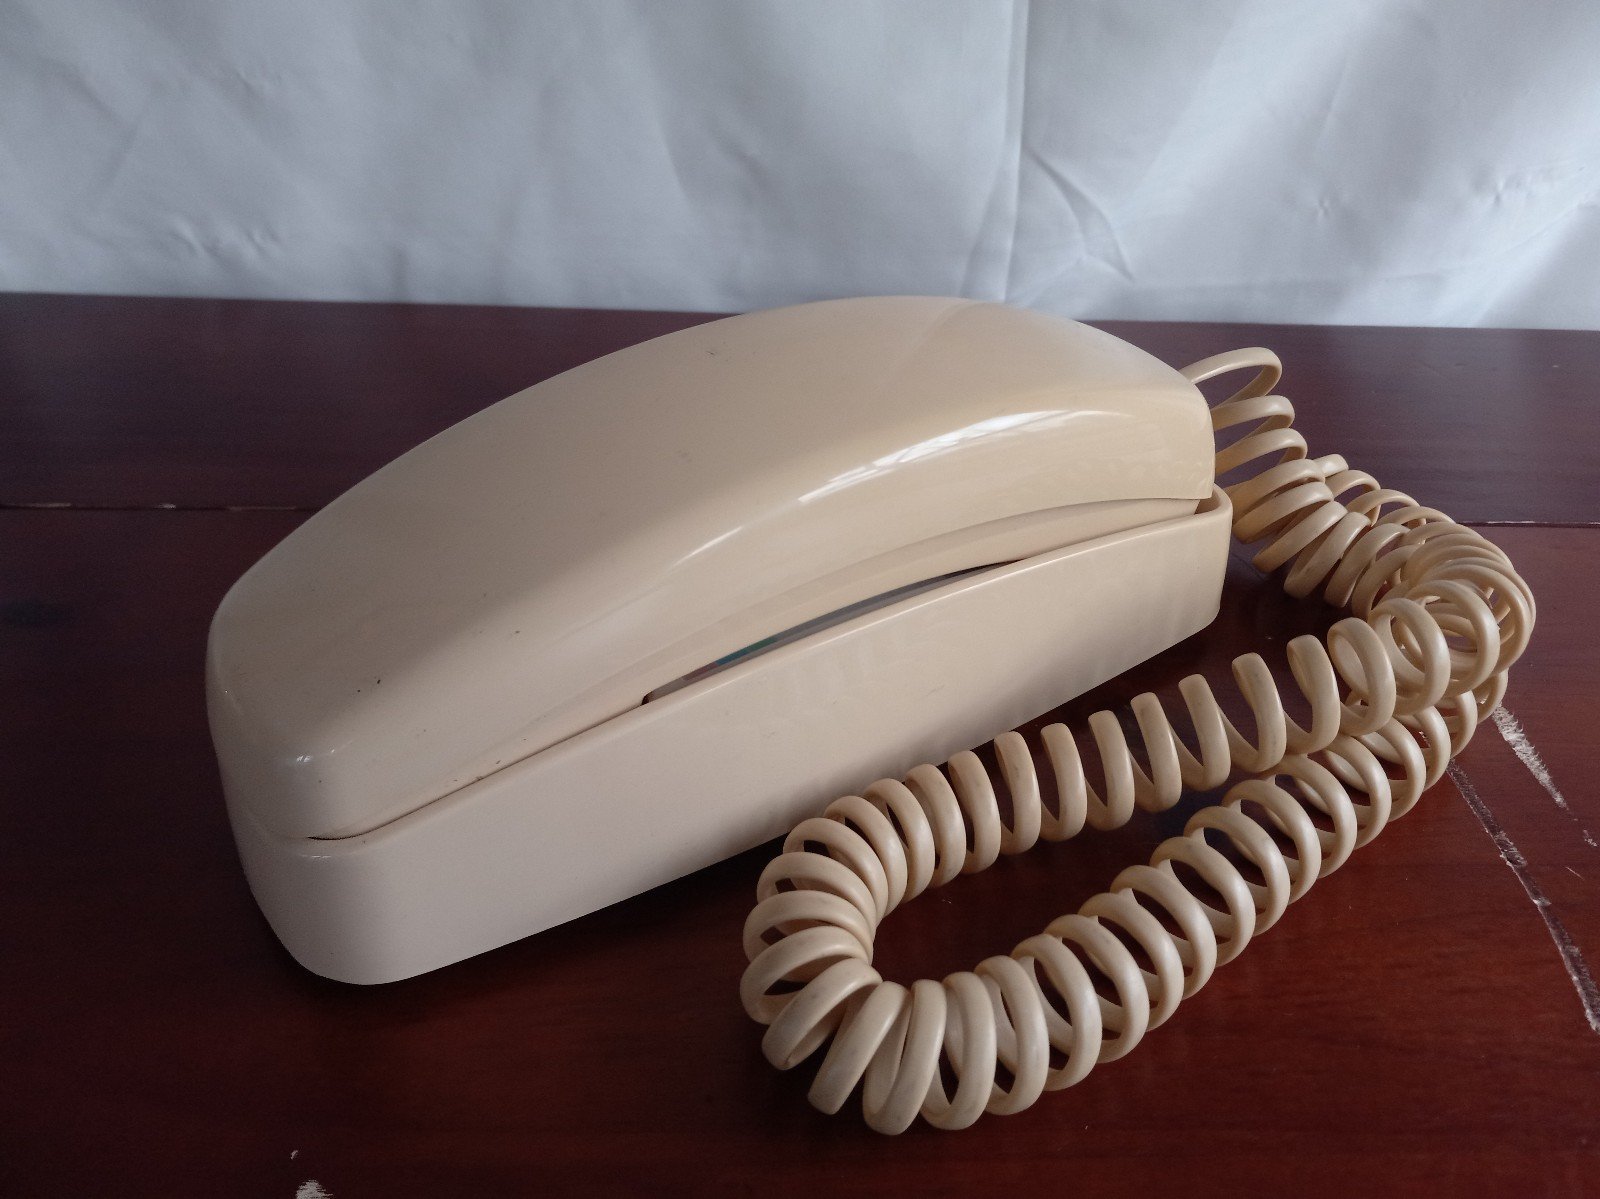 Vintage AT&T Trimline 210 Rotary Phone - BEIGE - TESTED! M1z5DtCS0